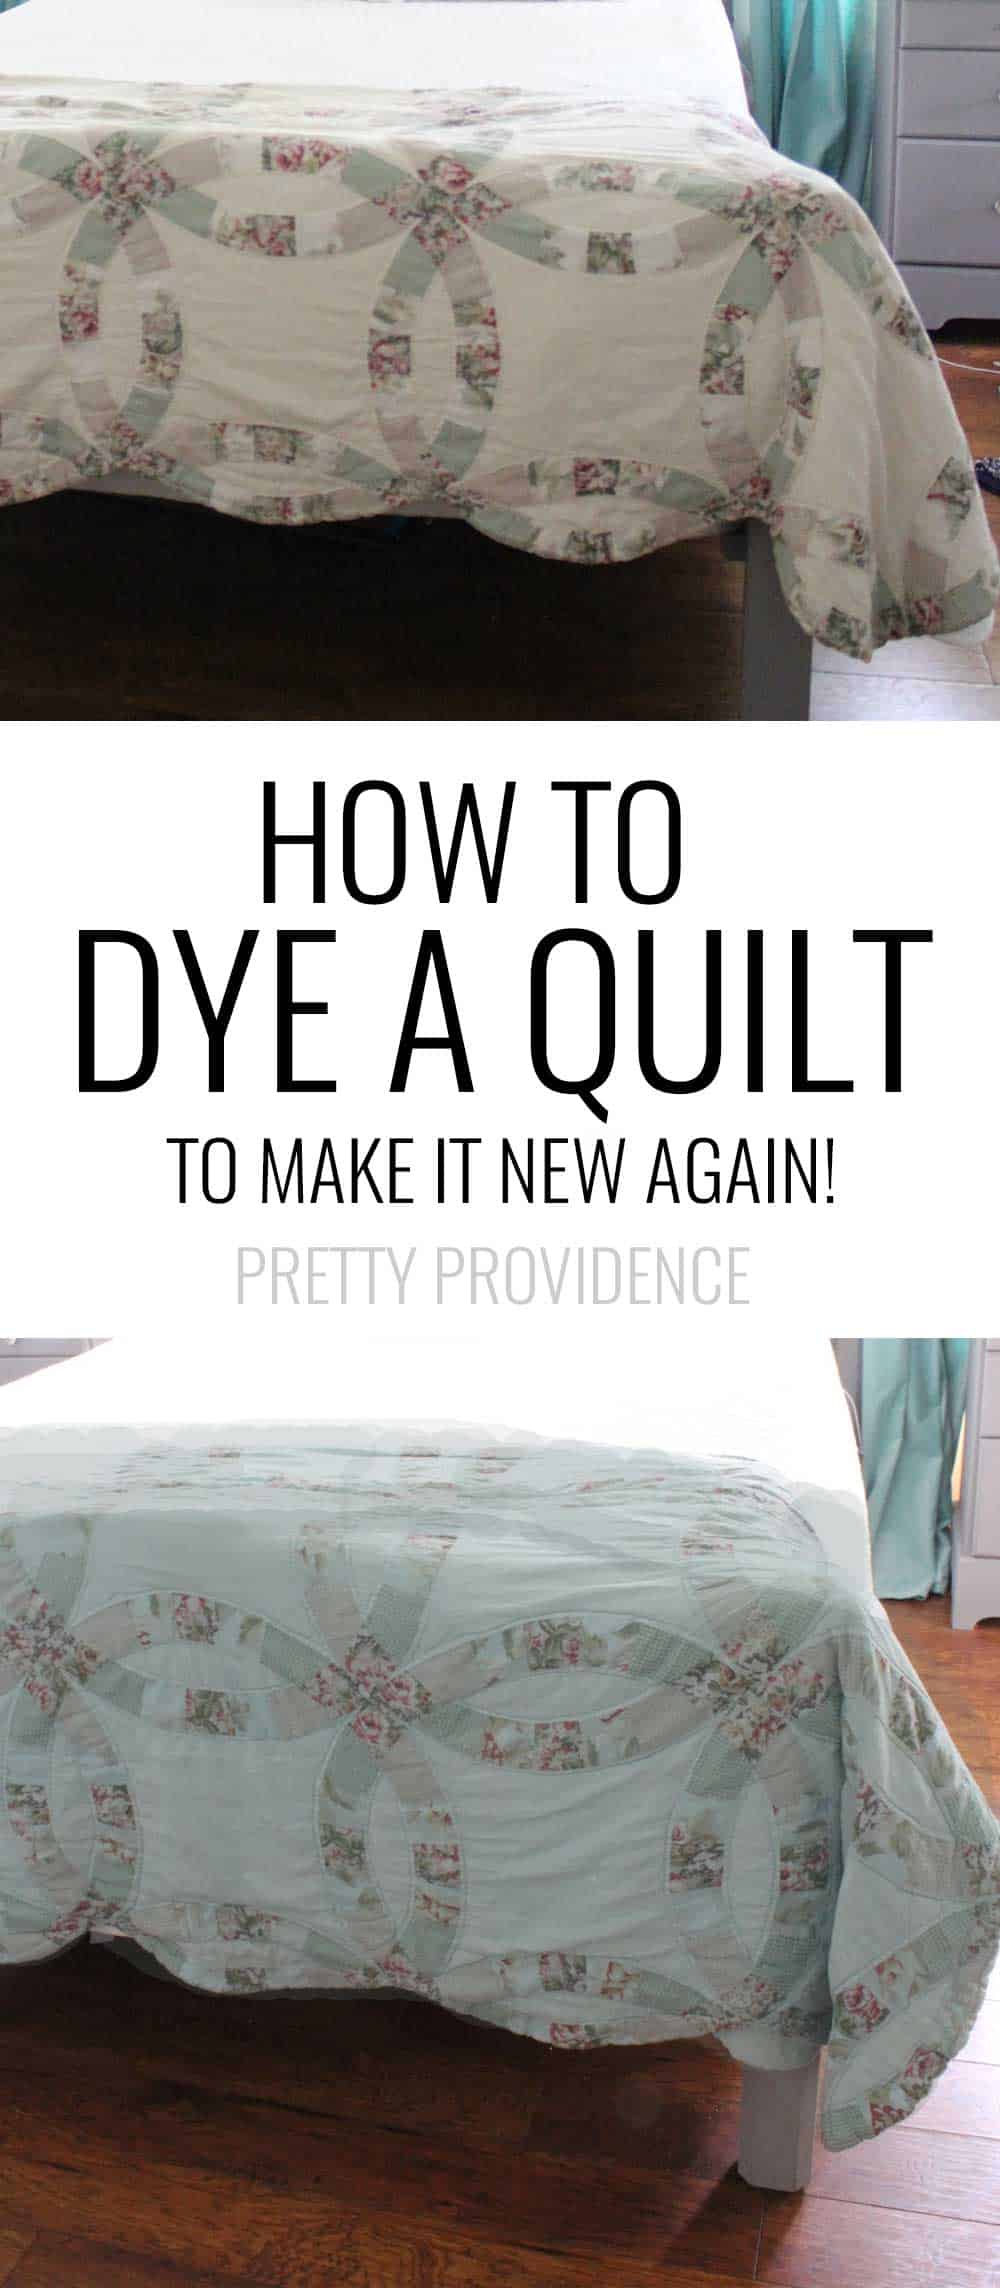 How to dye a quilt - perfect for old dingy quilts that you LOVE but just need a refresh! 